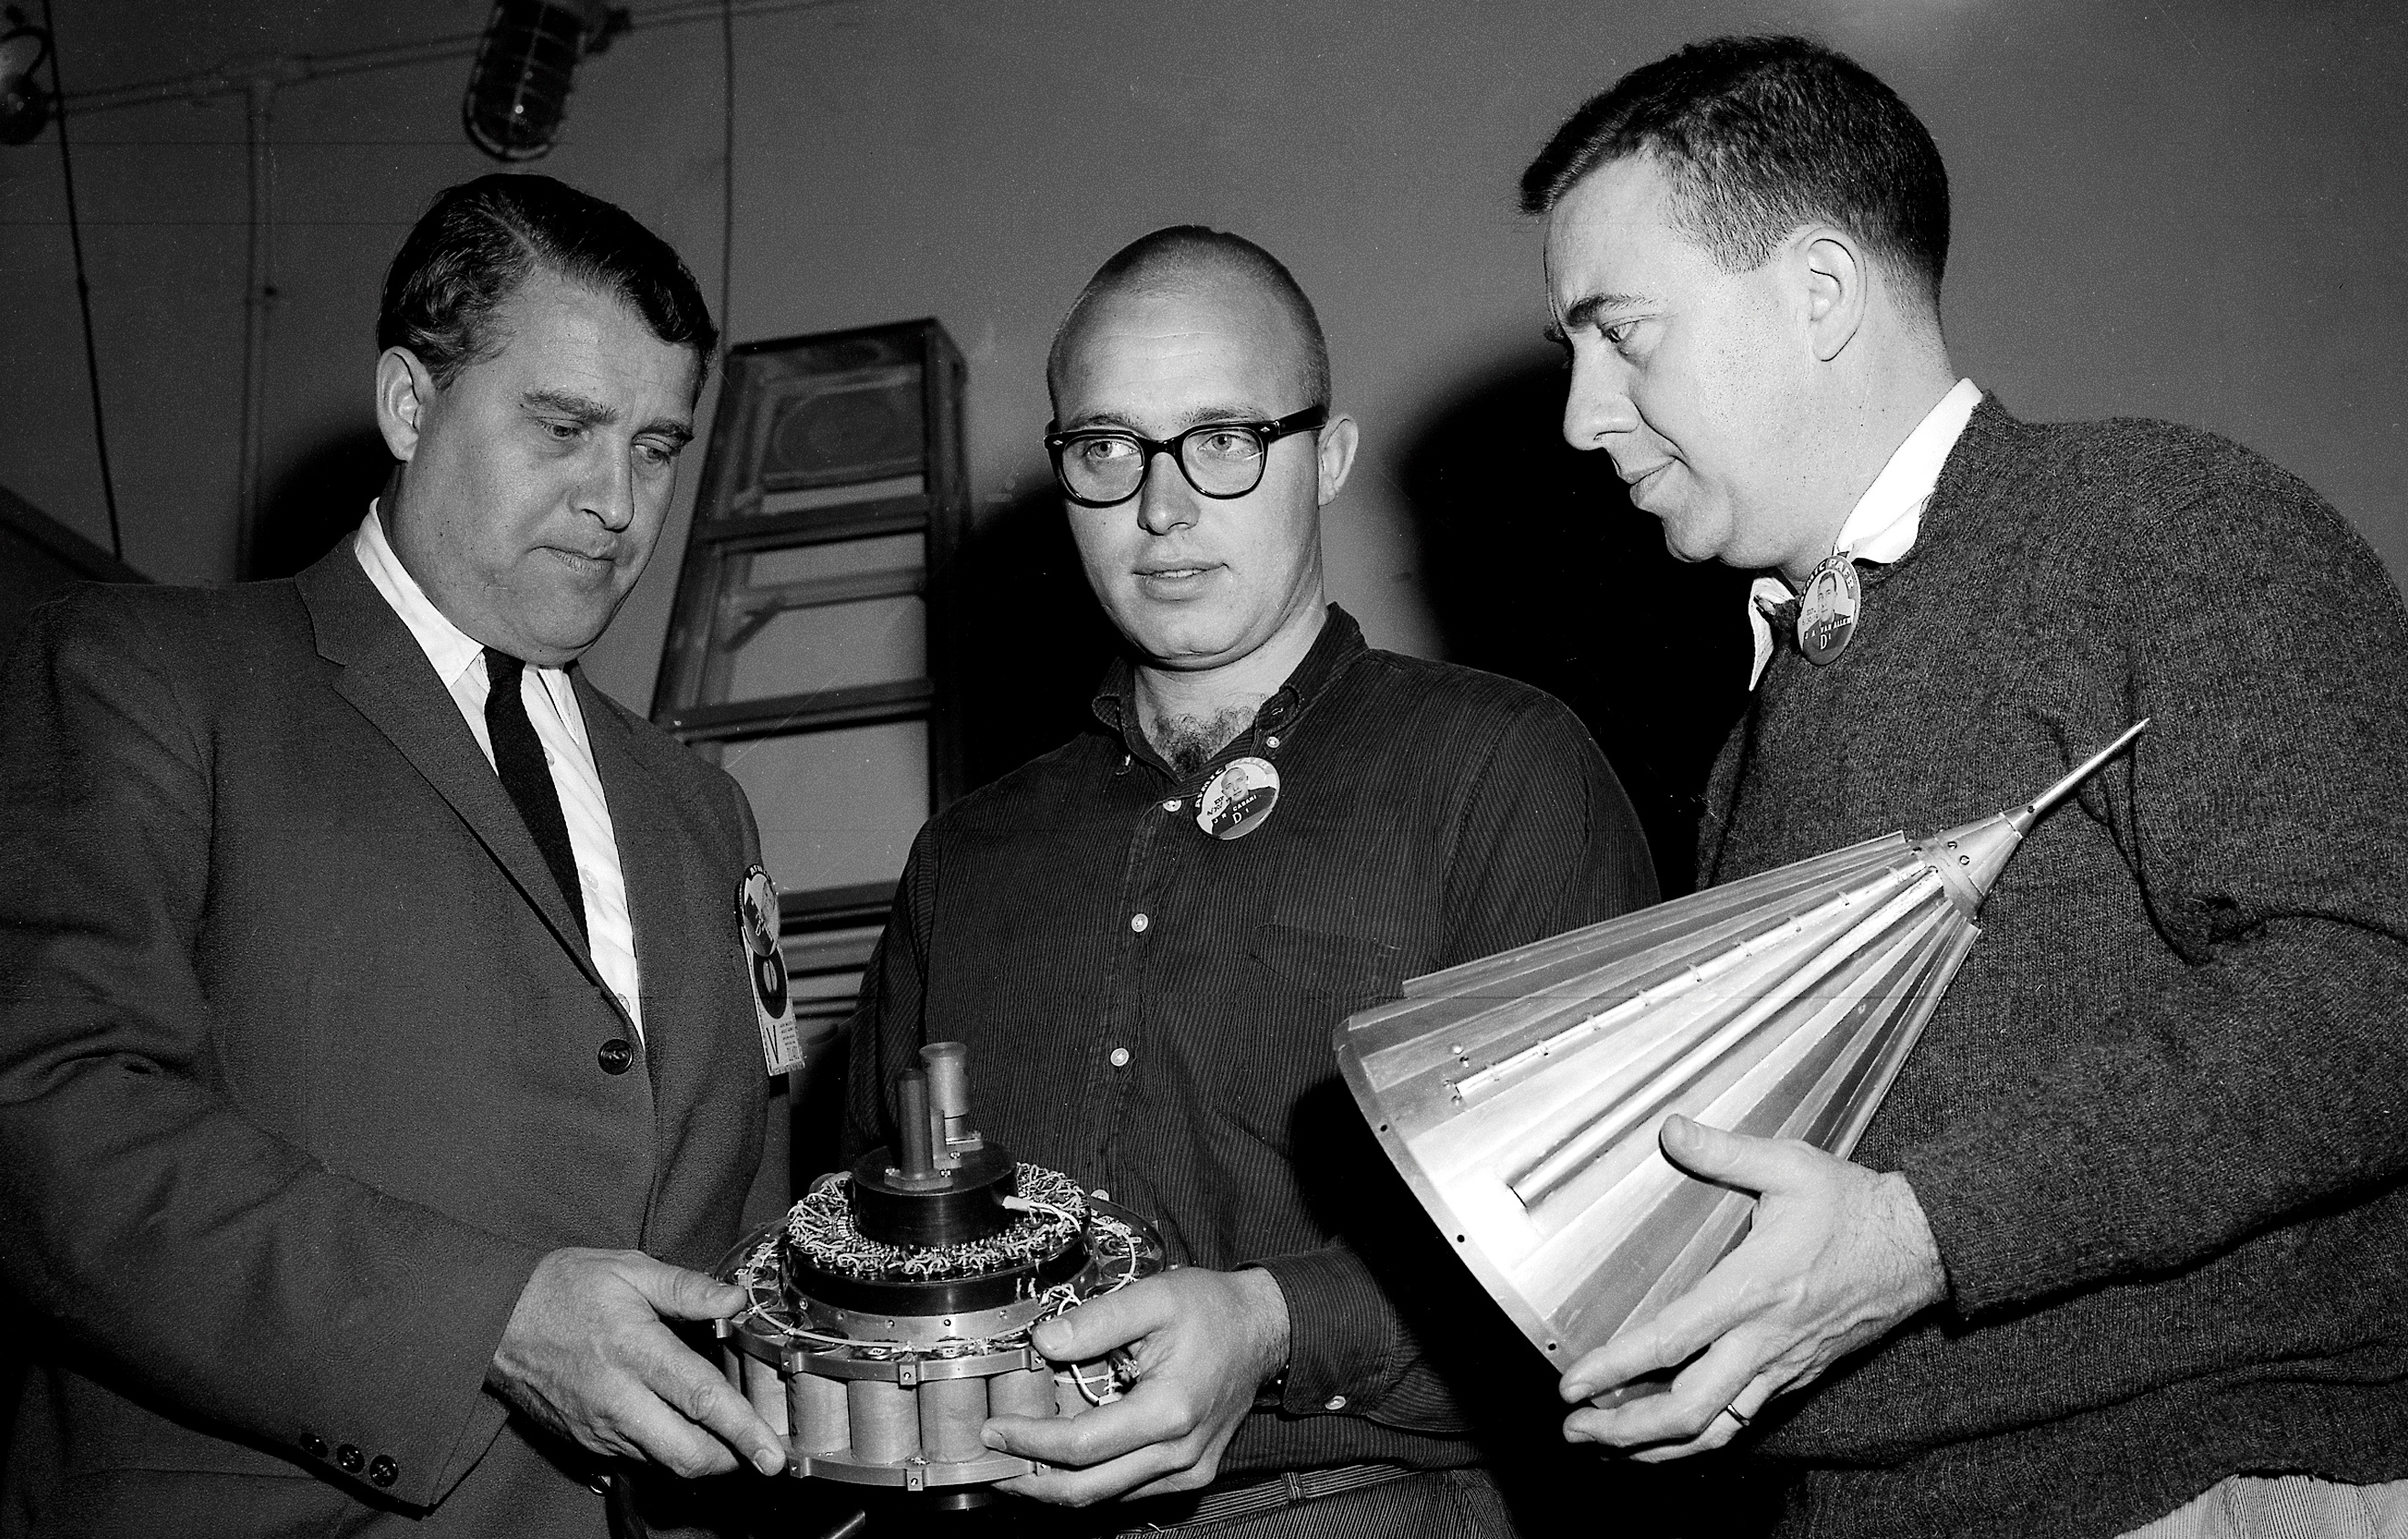 Black and white image of three men holding a small, conical spacecraft.